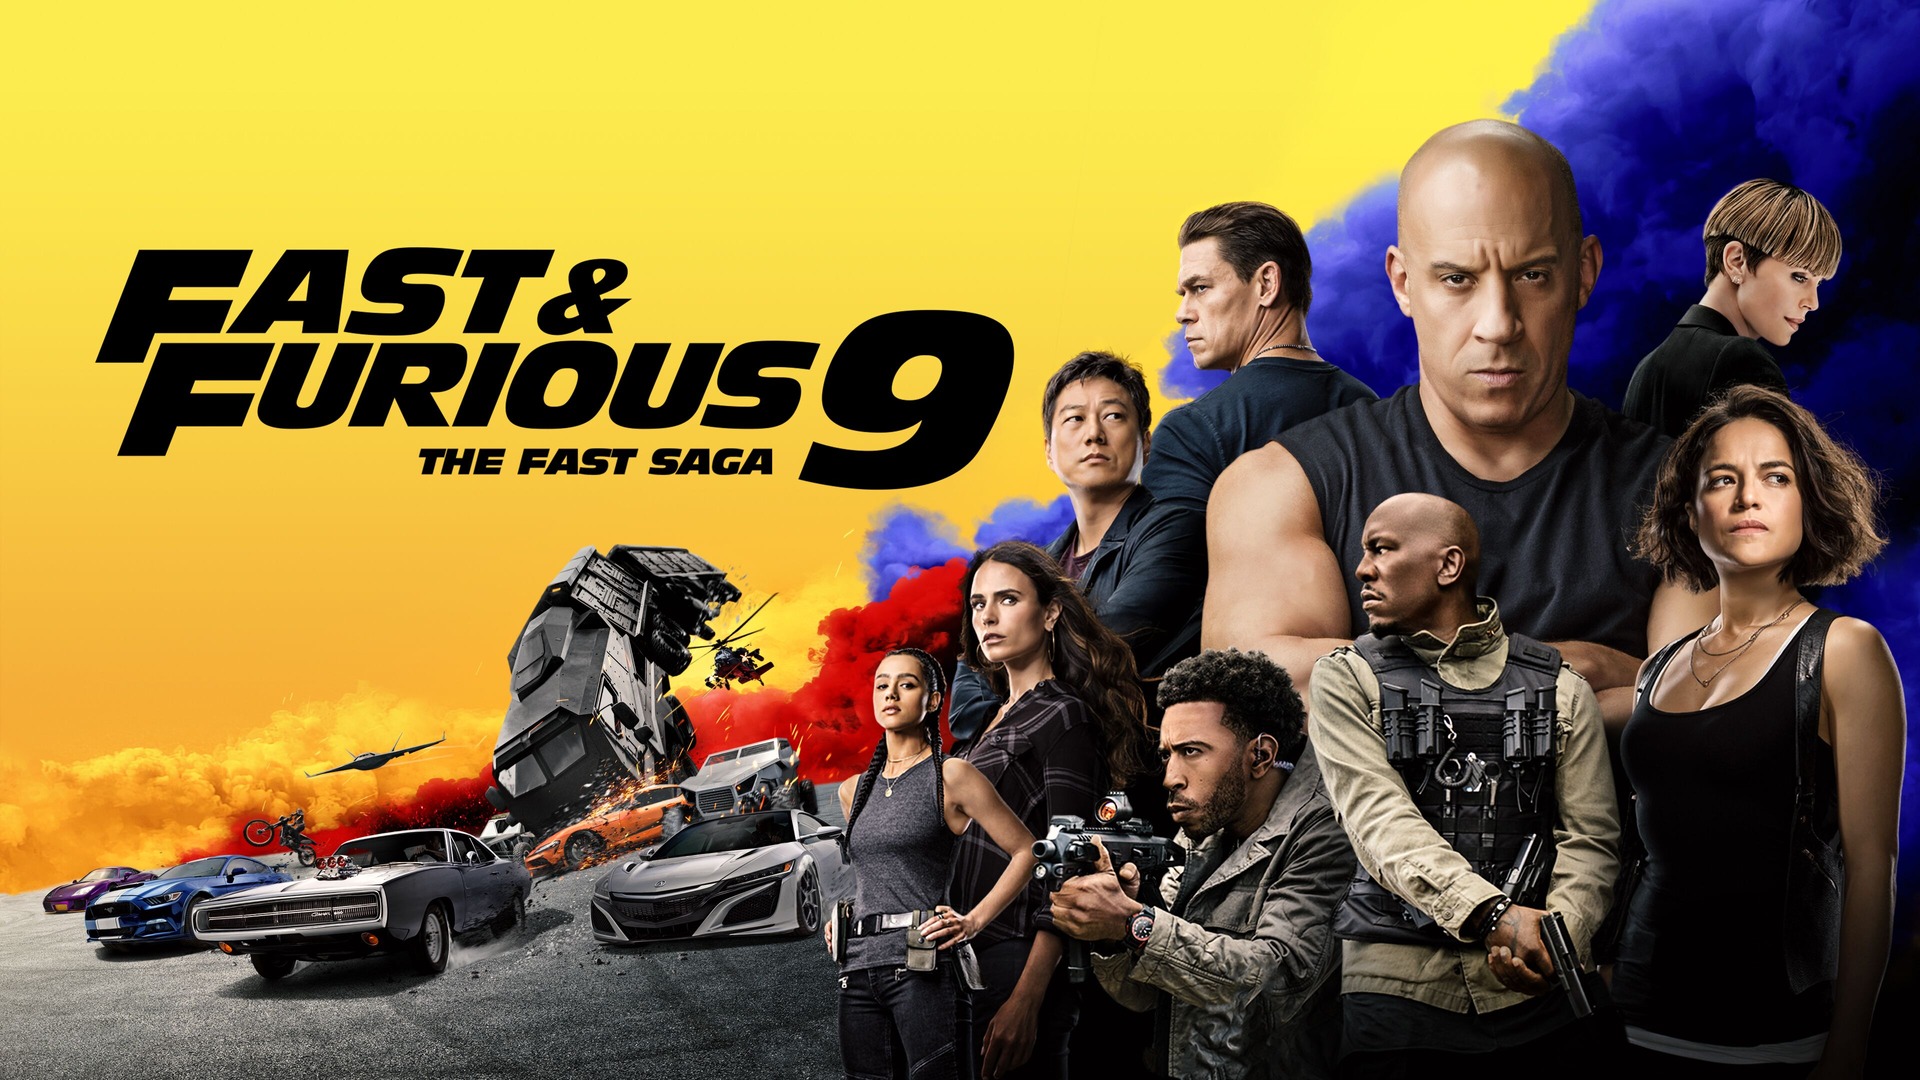 Fast & Furious 9 | TV 2 Play